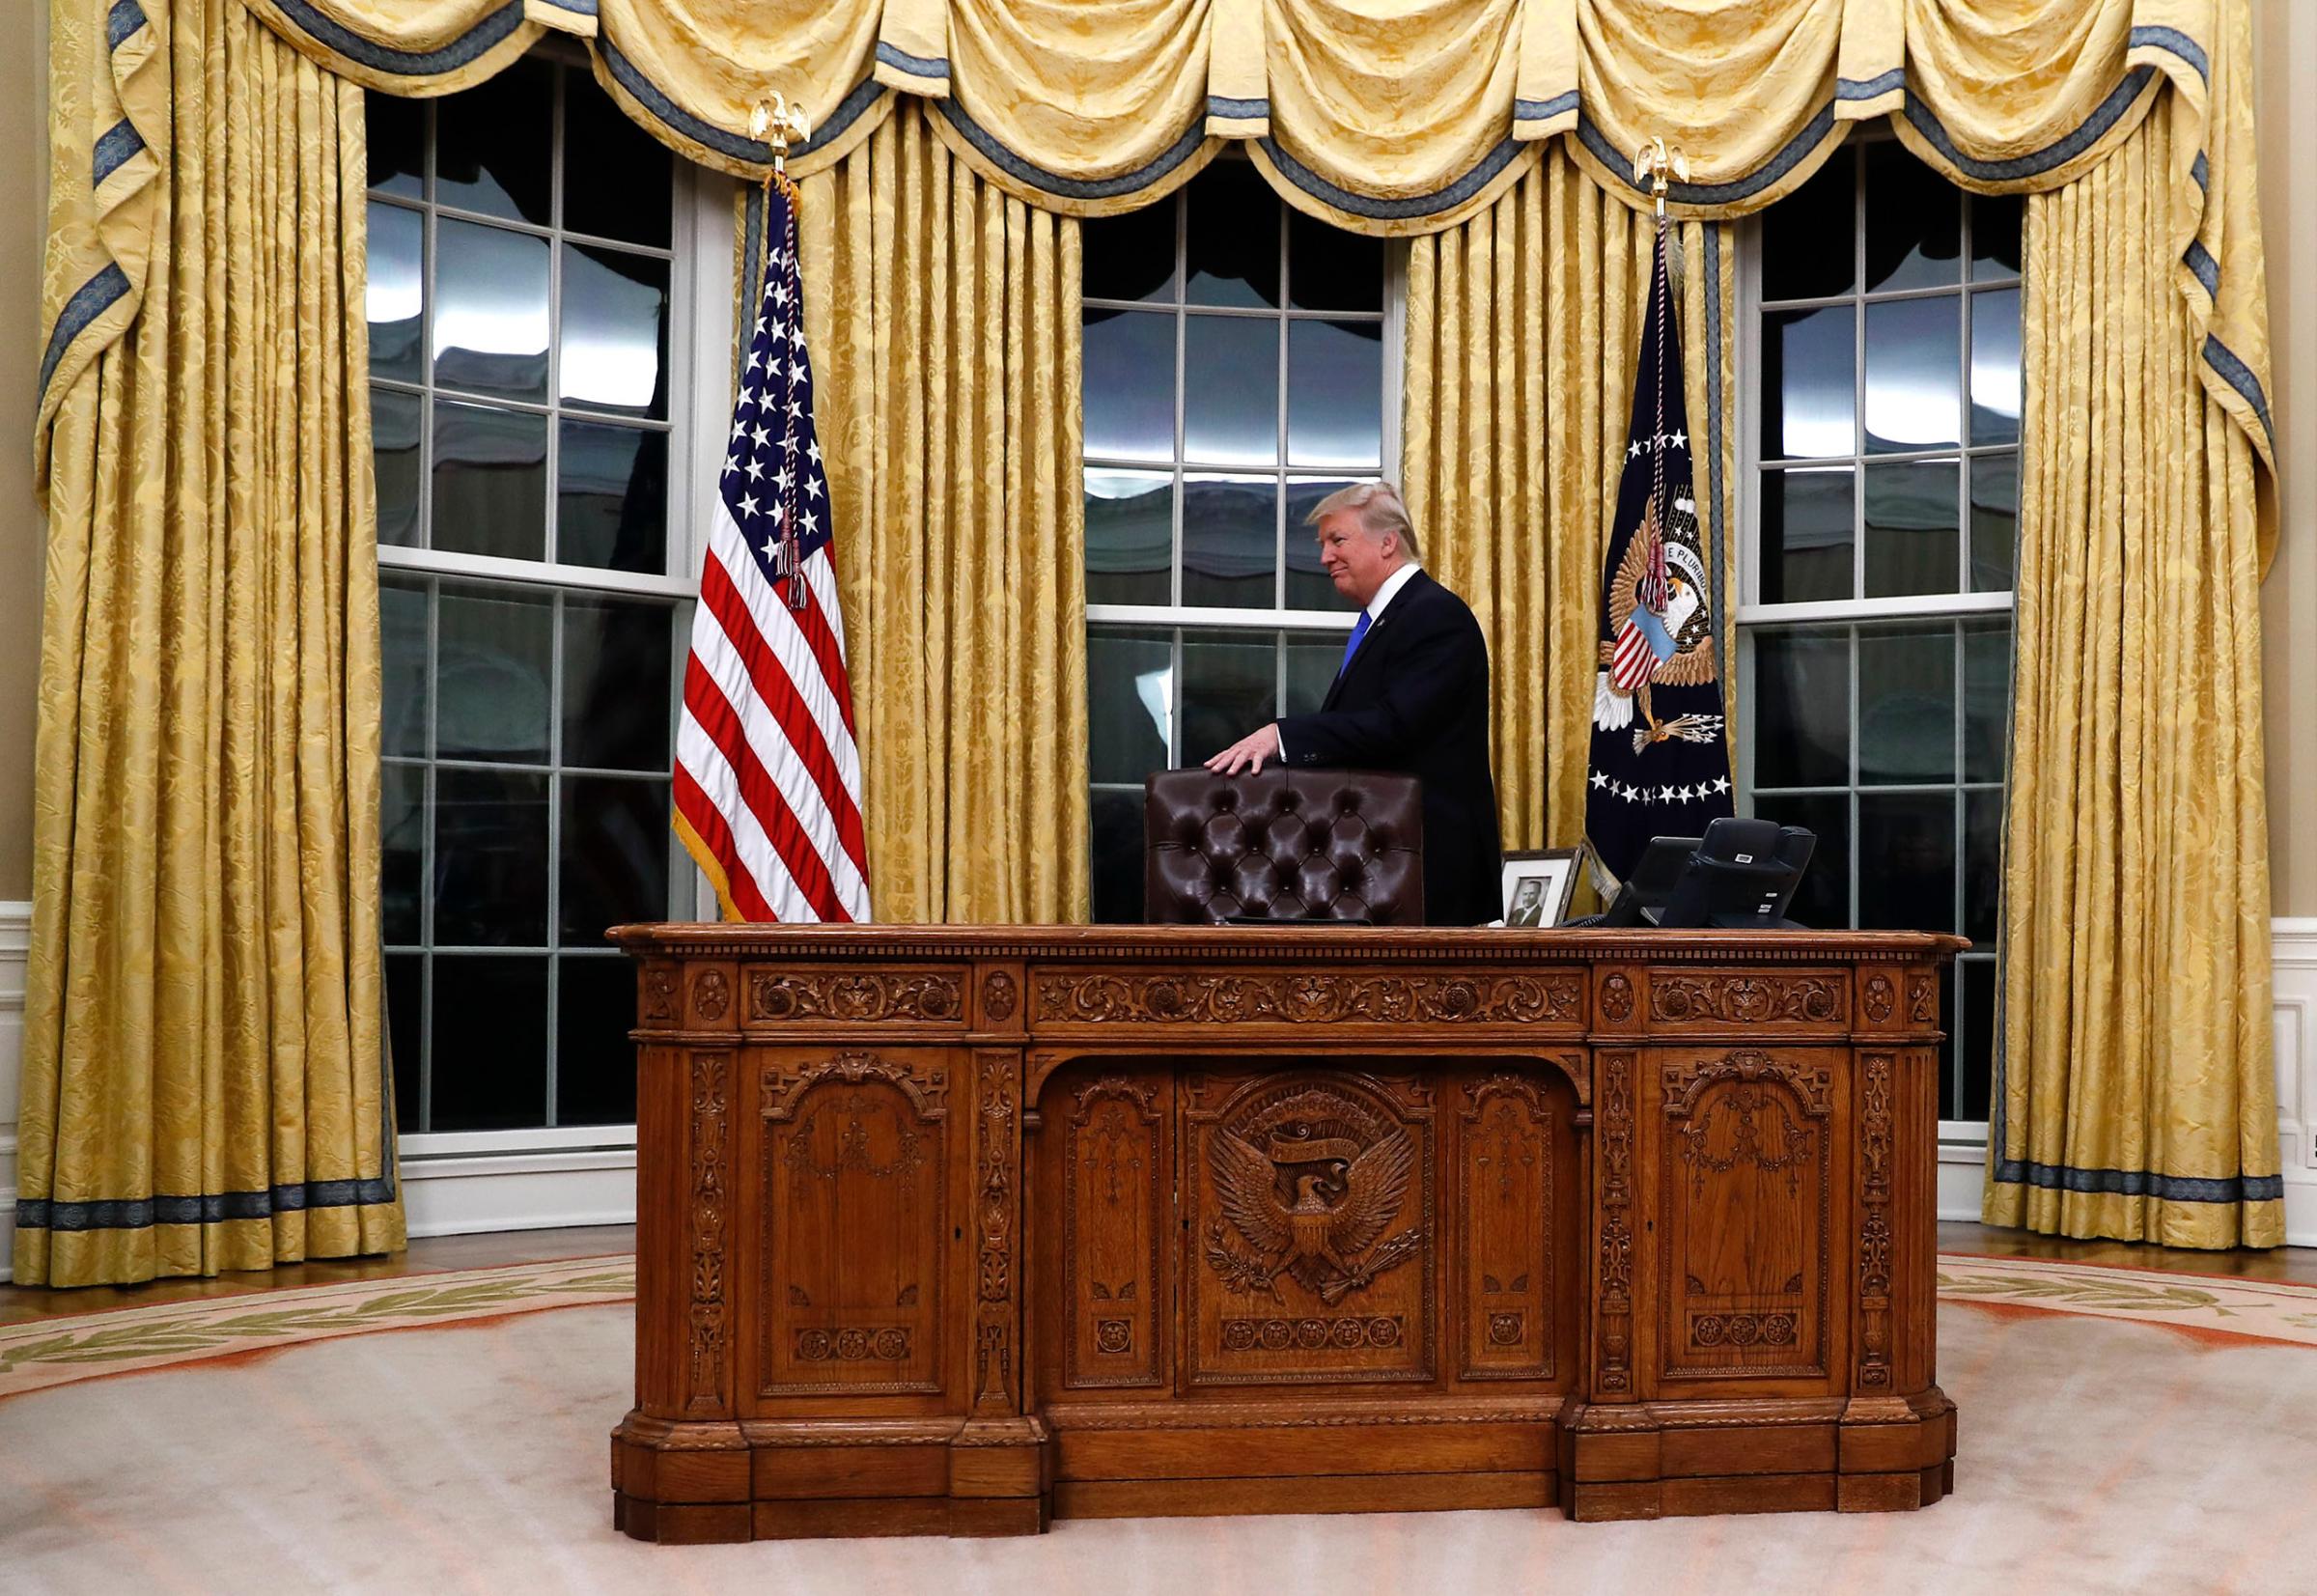 President Donald Trump walks around the Resolute desk during a ceremony for the swearing in of Rex Tillerson as Secretary of State in Oval Office of the White House in Washington, on Feb. 1, 2017.